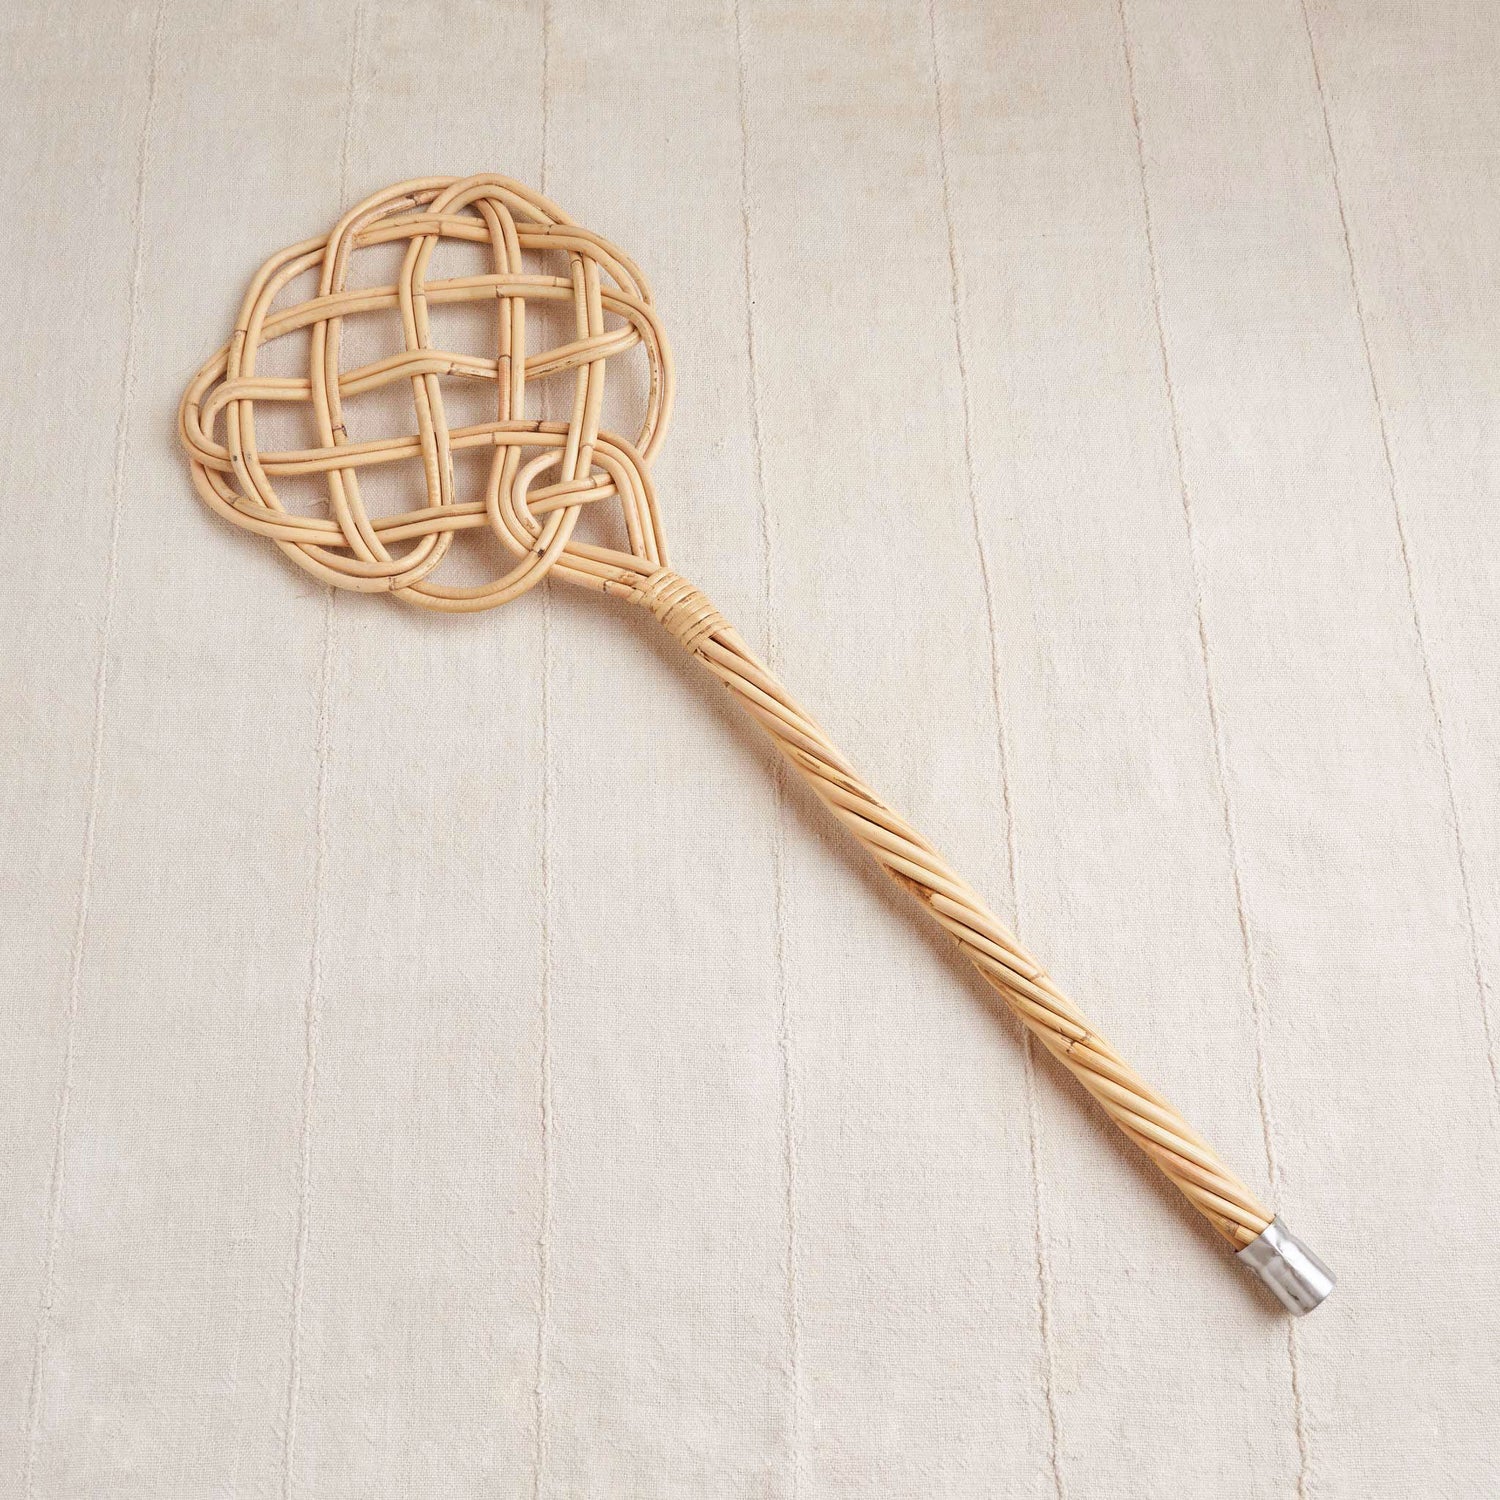  ZKHD Carpet Beater 3 Strand Wicker Rattan Clean Duster Carpet Rug  Beater Durable Hand Made for Pet Owner Last Long : Everything Else